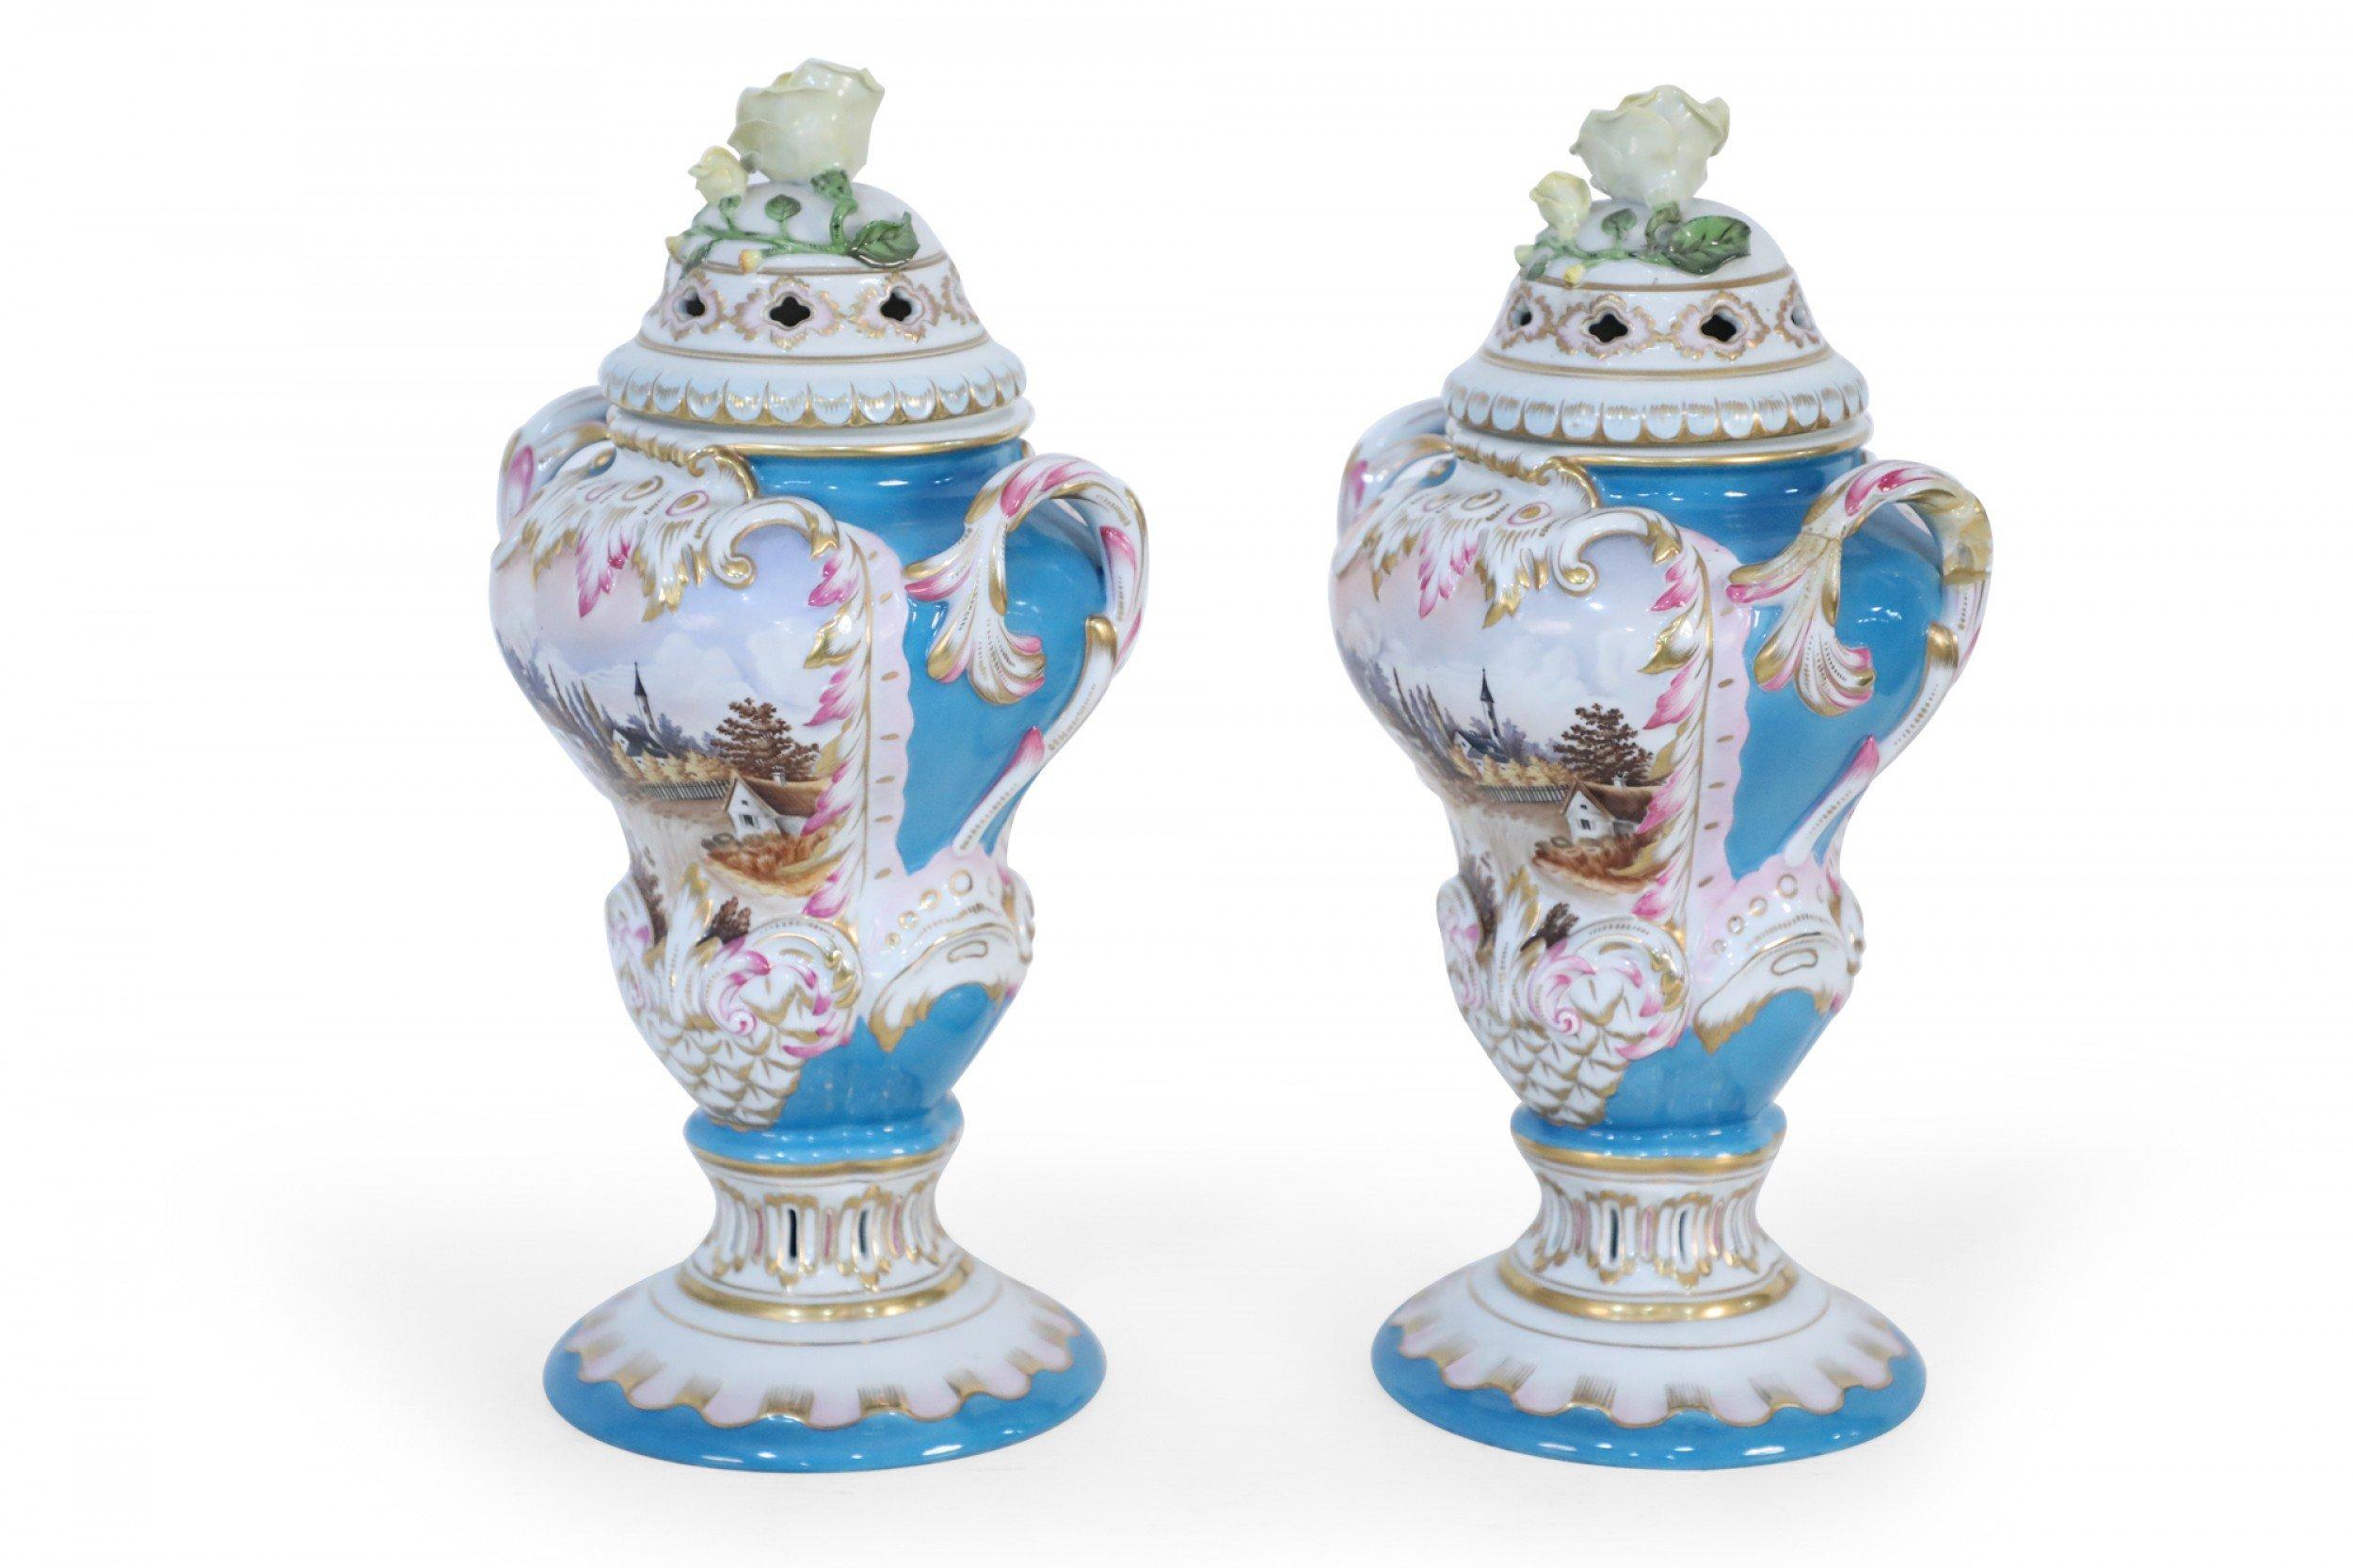 Pair of Herend Hungarian Blue Decorated and Lidded Porcelain Urns For Sale 1